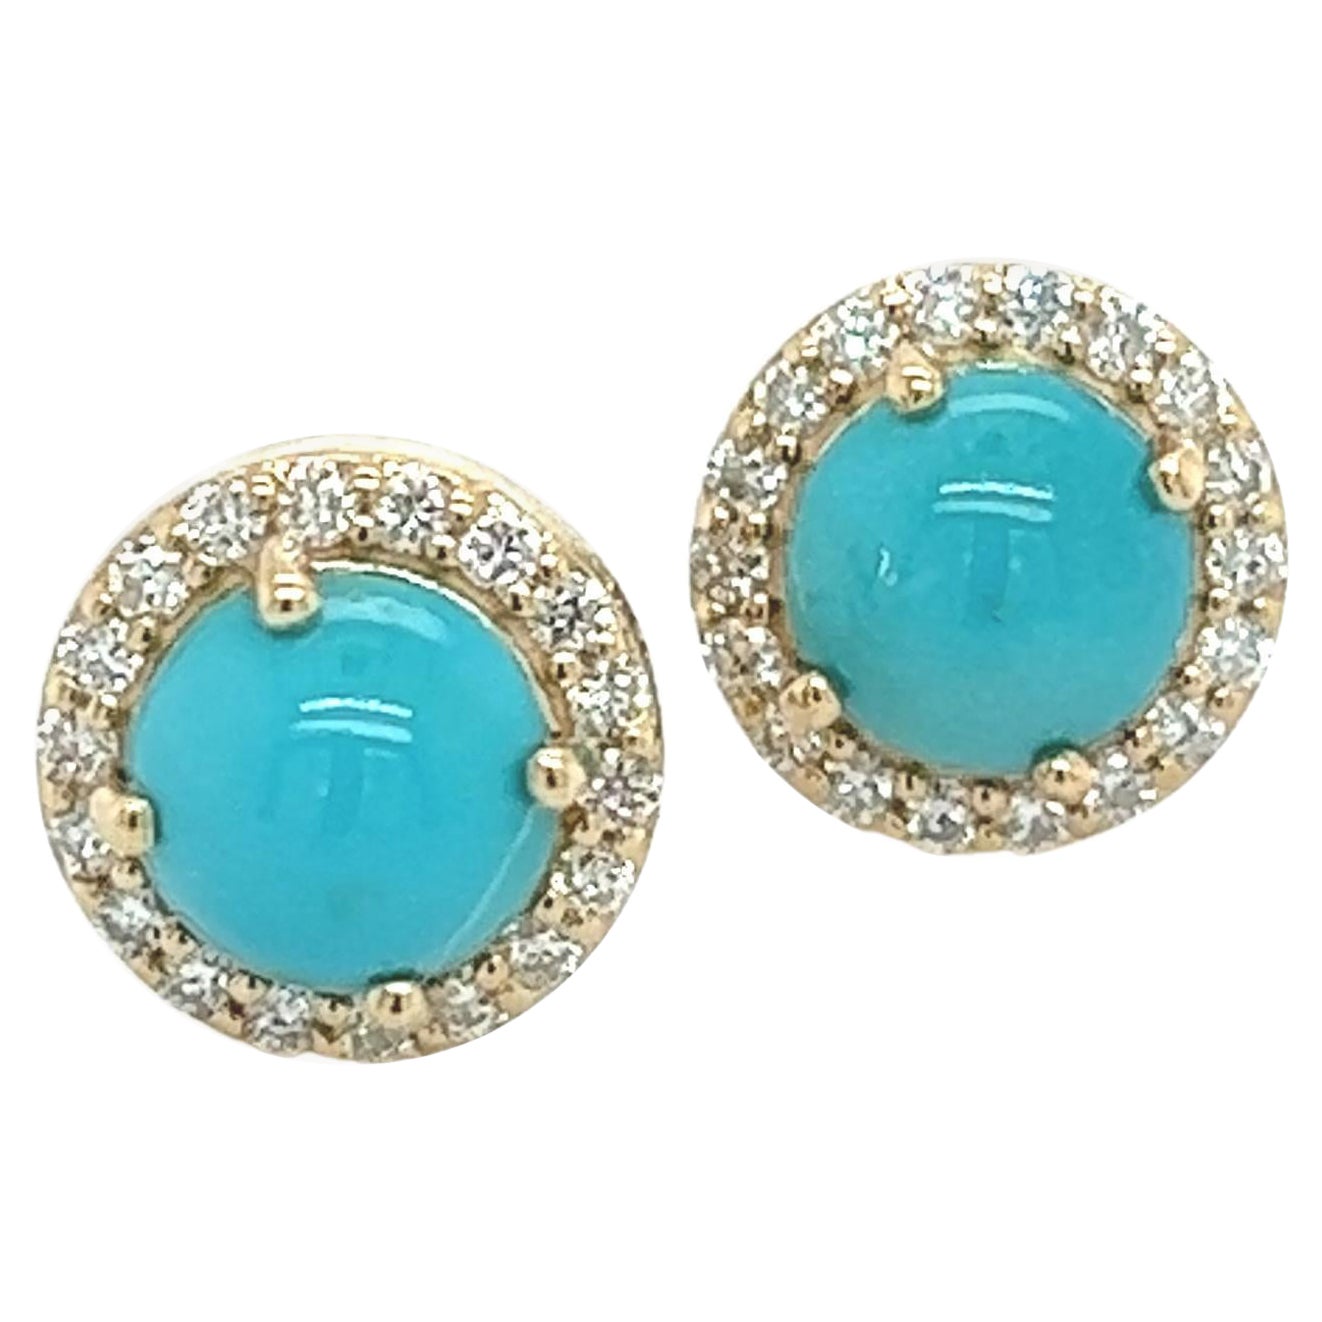 Natural Turquoise Diamond Stud Earrings 14k Yellow Gold 2.18 TCW Certified For Sale